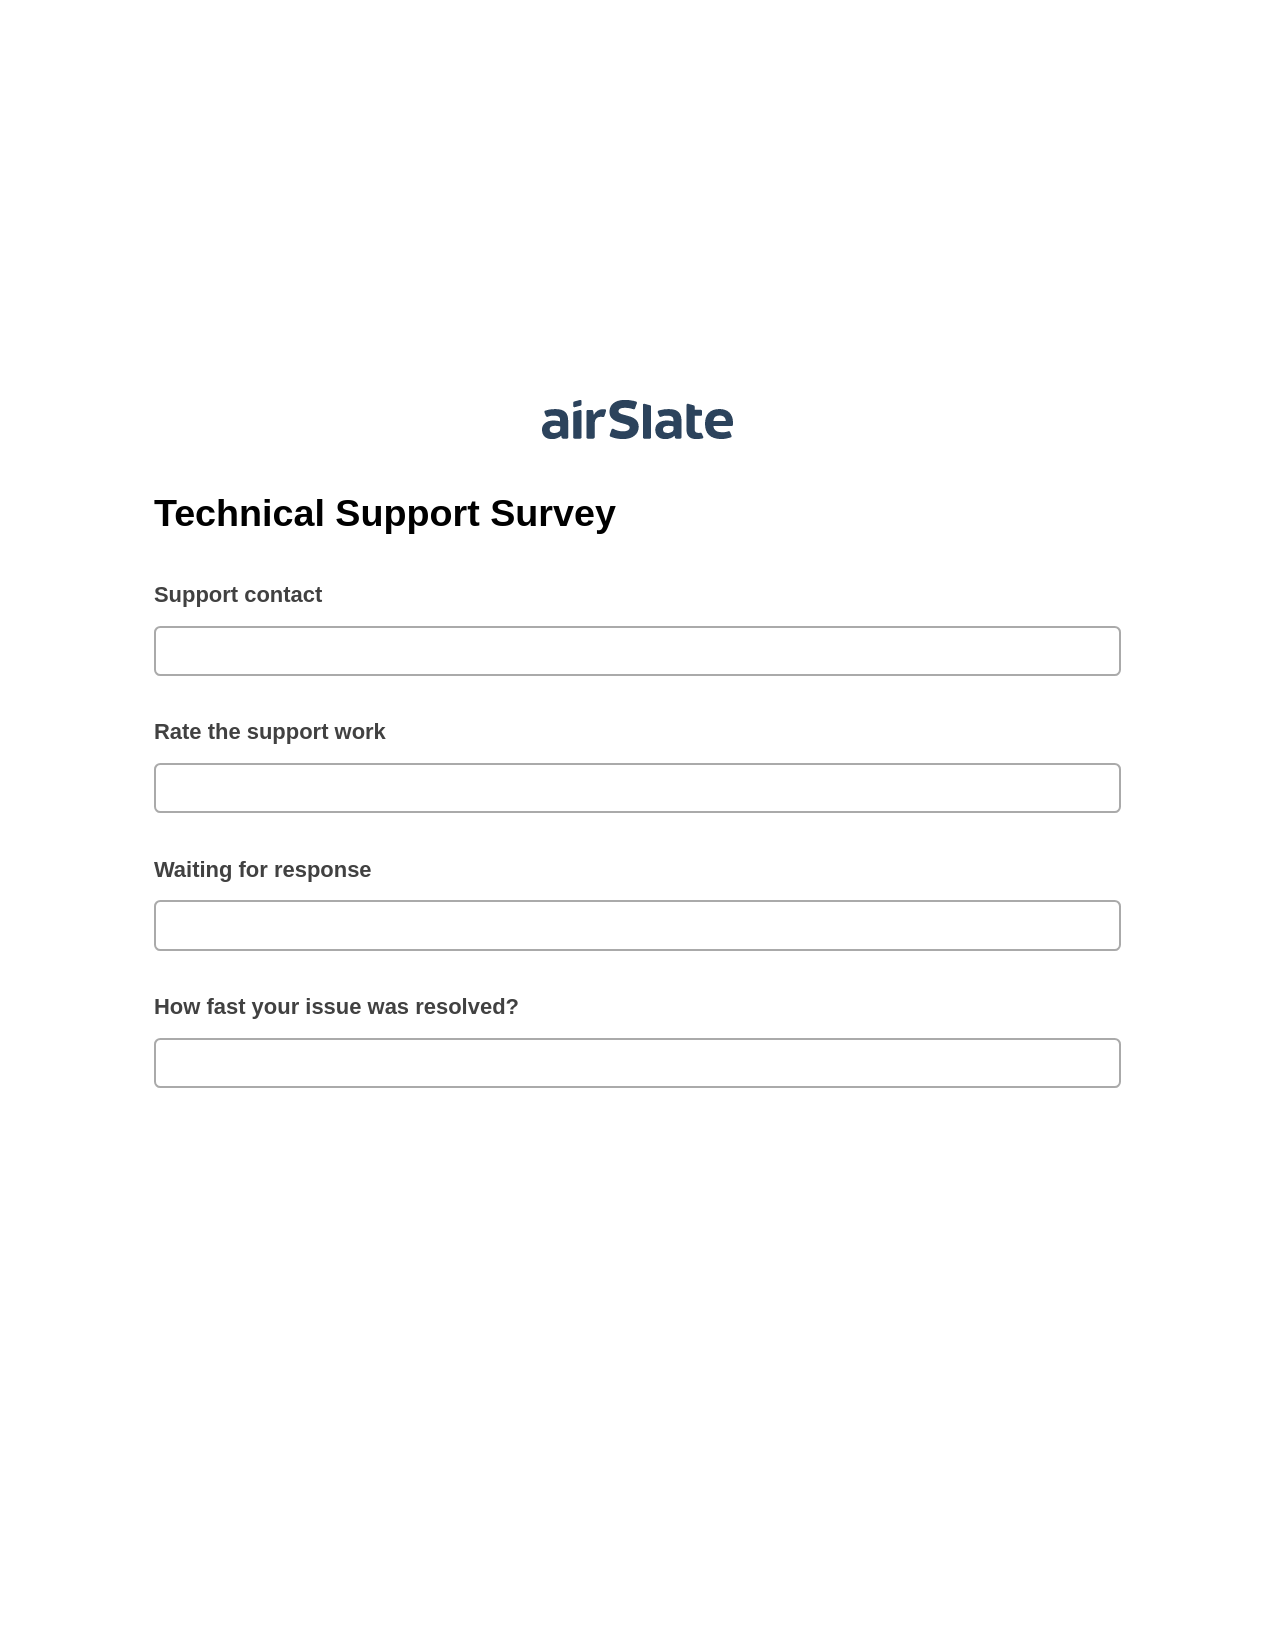 Technical Support Survey Pre-fill from CSV File Bot, Hide Signatures Bot, Webhook Postfinish Bot